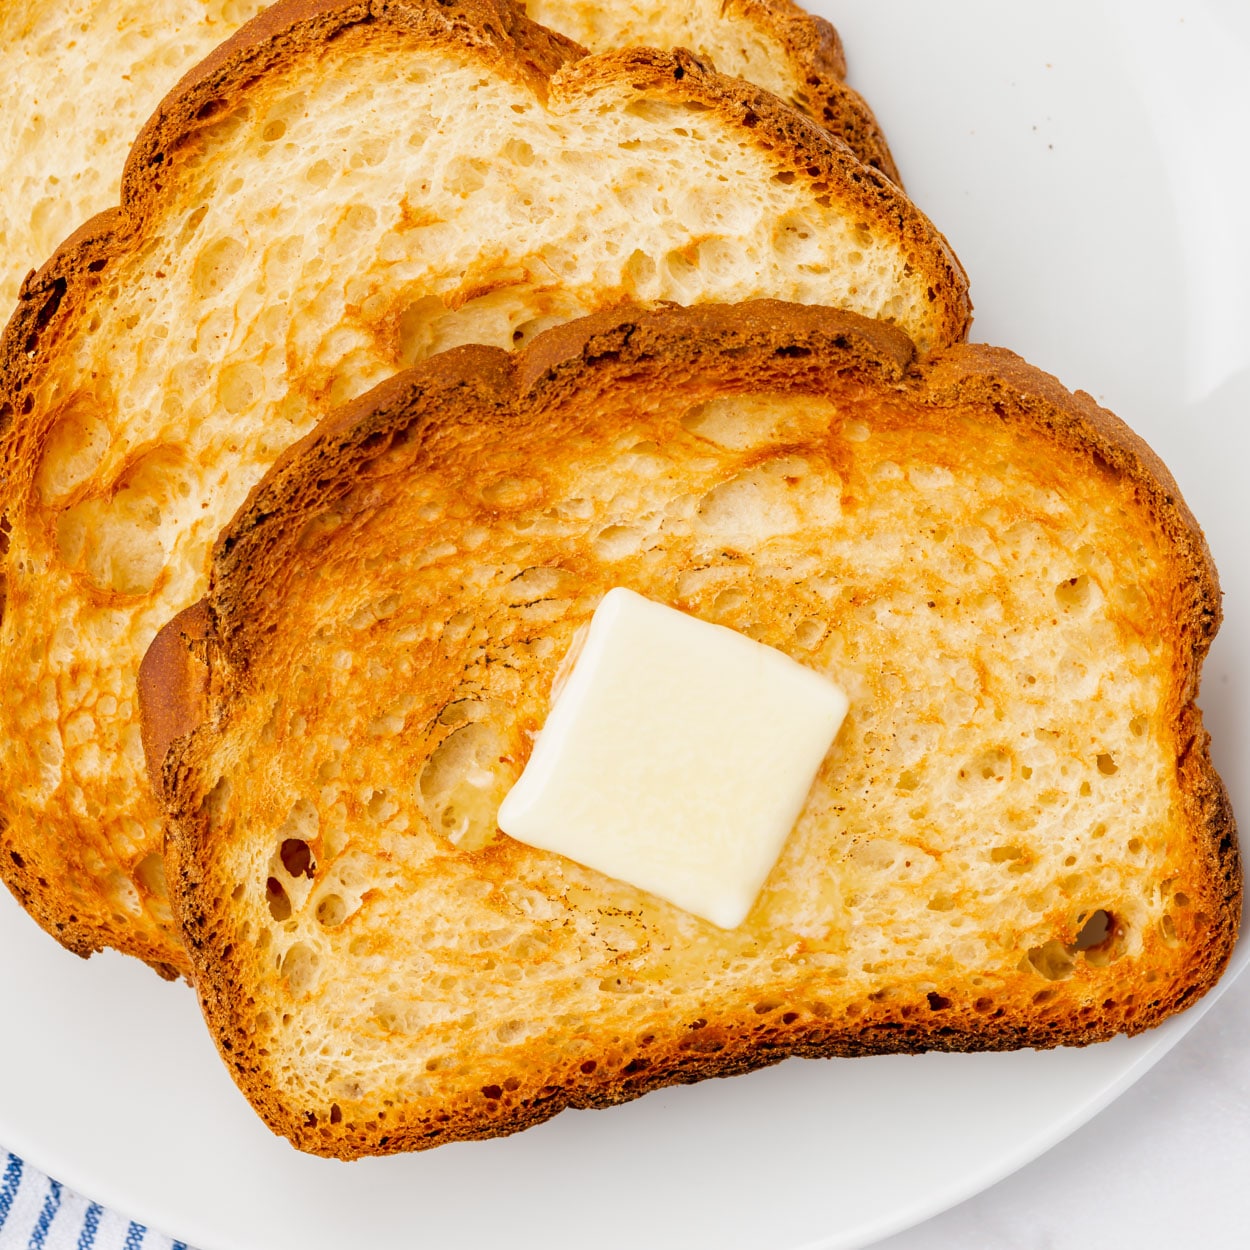 How to Use Machine Learning to Create Perfect Toast Every Time